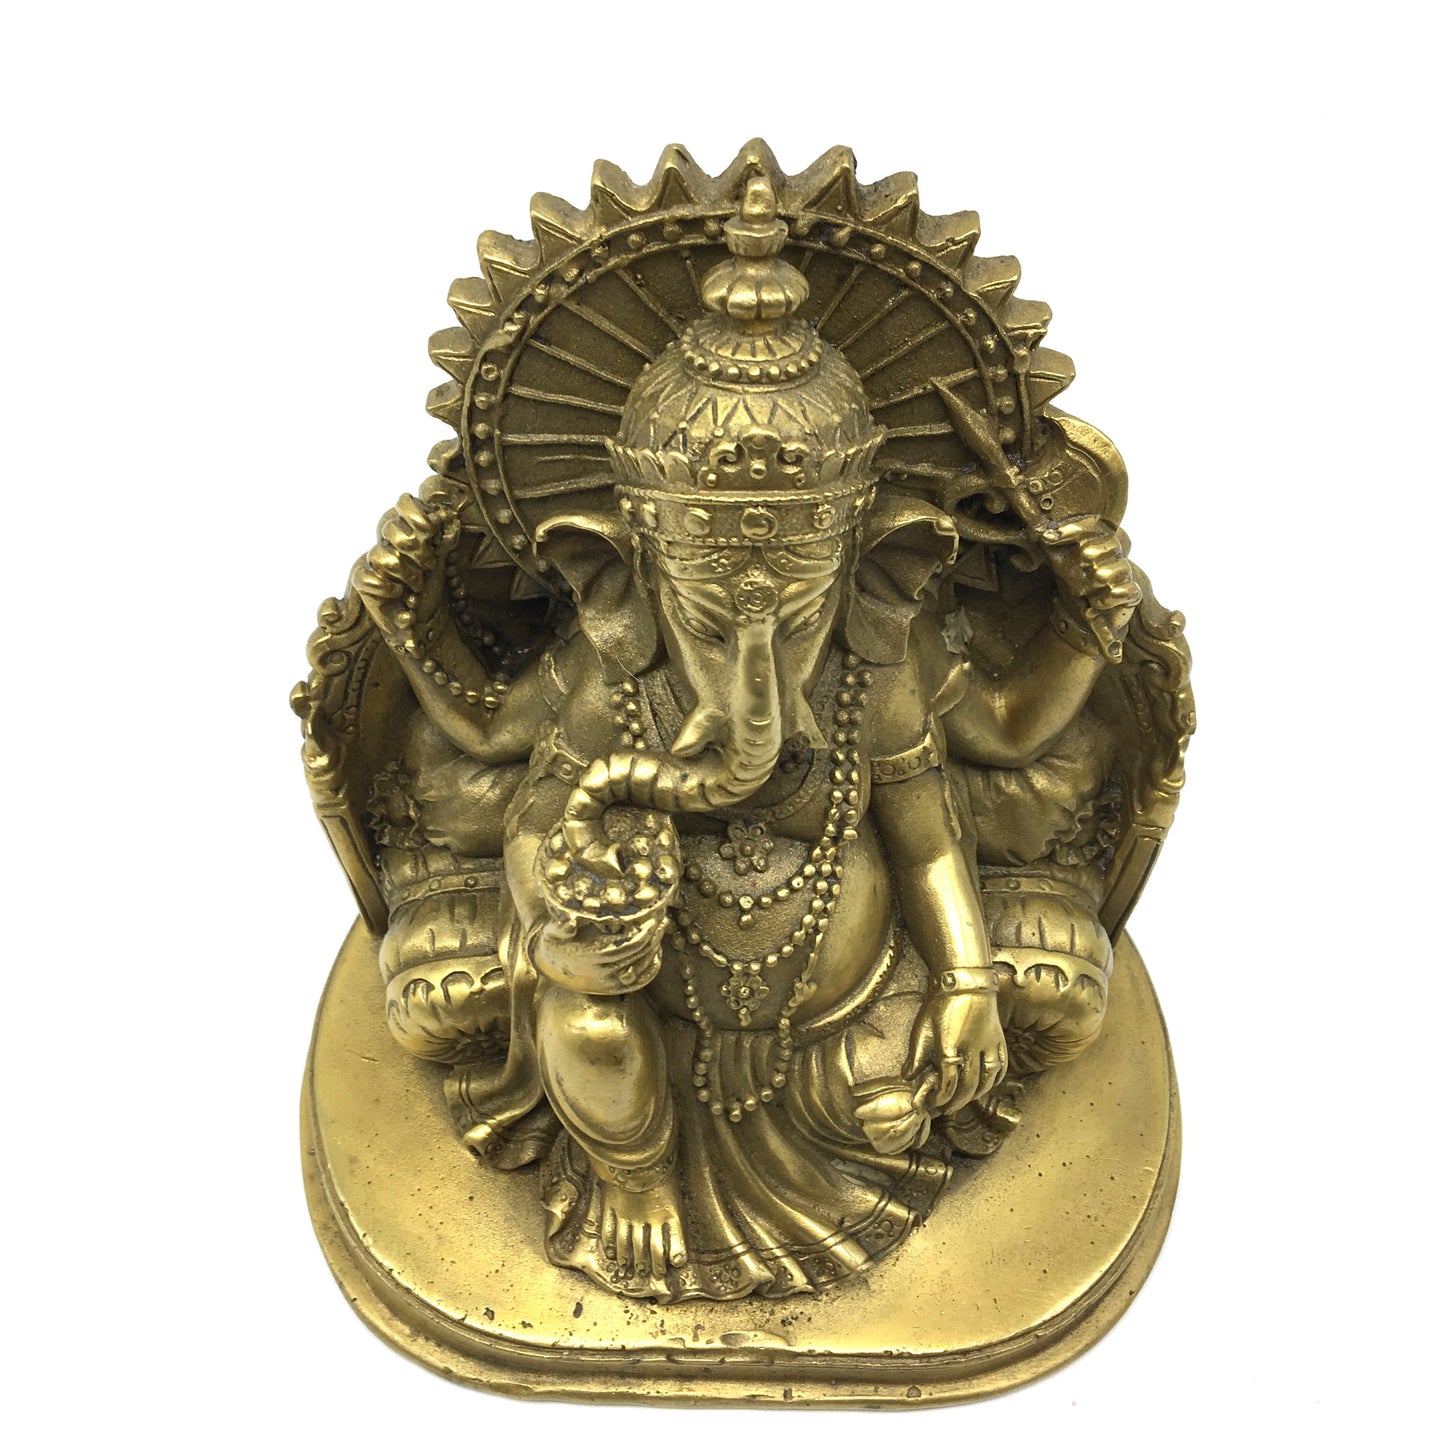 Handmade Brass Ganapati Ganesh India Elephant God Obstacle Remover Statue